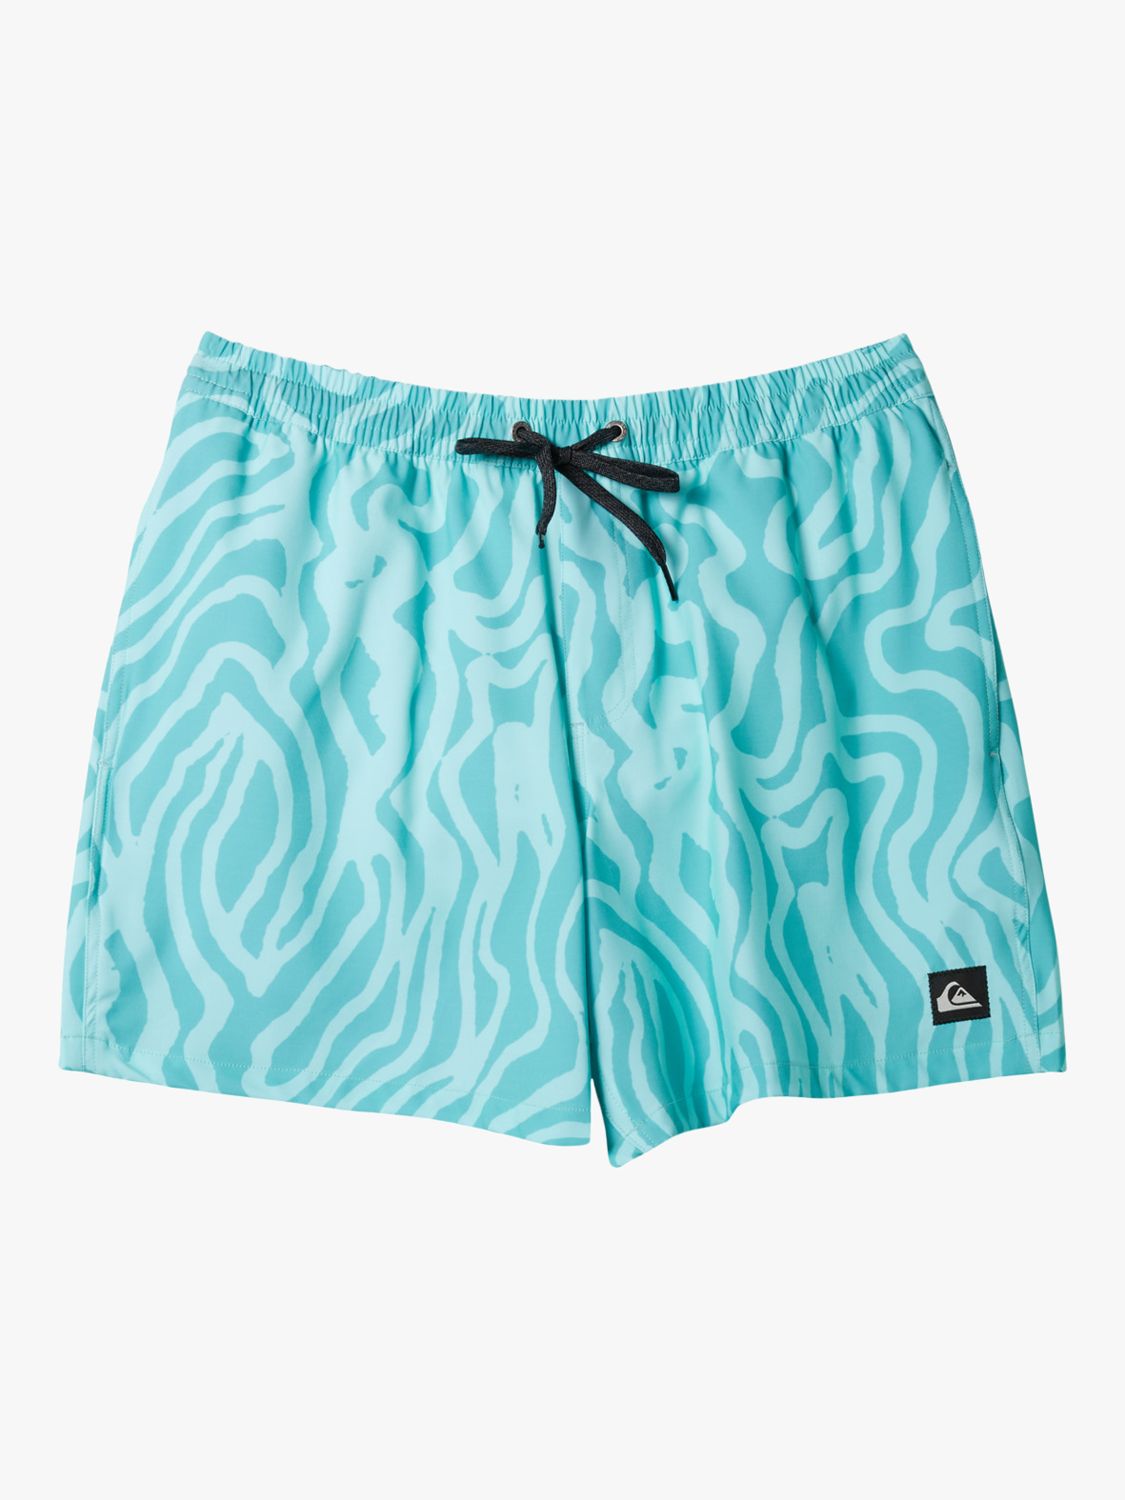 Quicksilver Kids' Everyday Collection SURFSILK Abstract Print Swim Shorts, Swedish Blue, 8 years